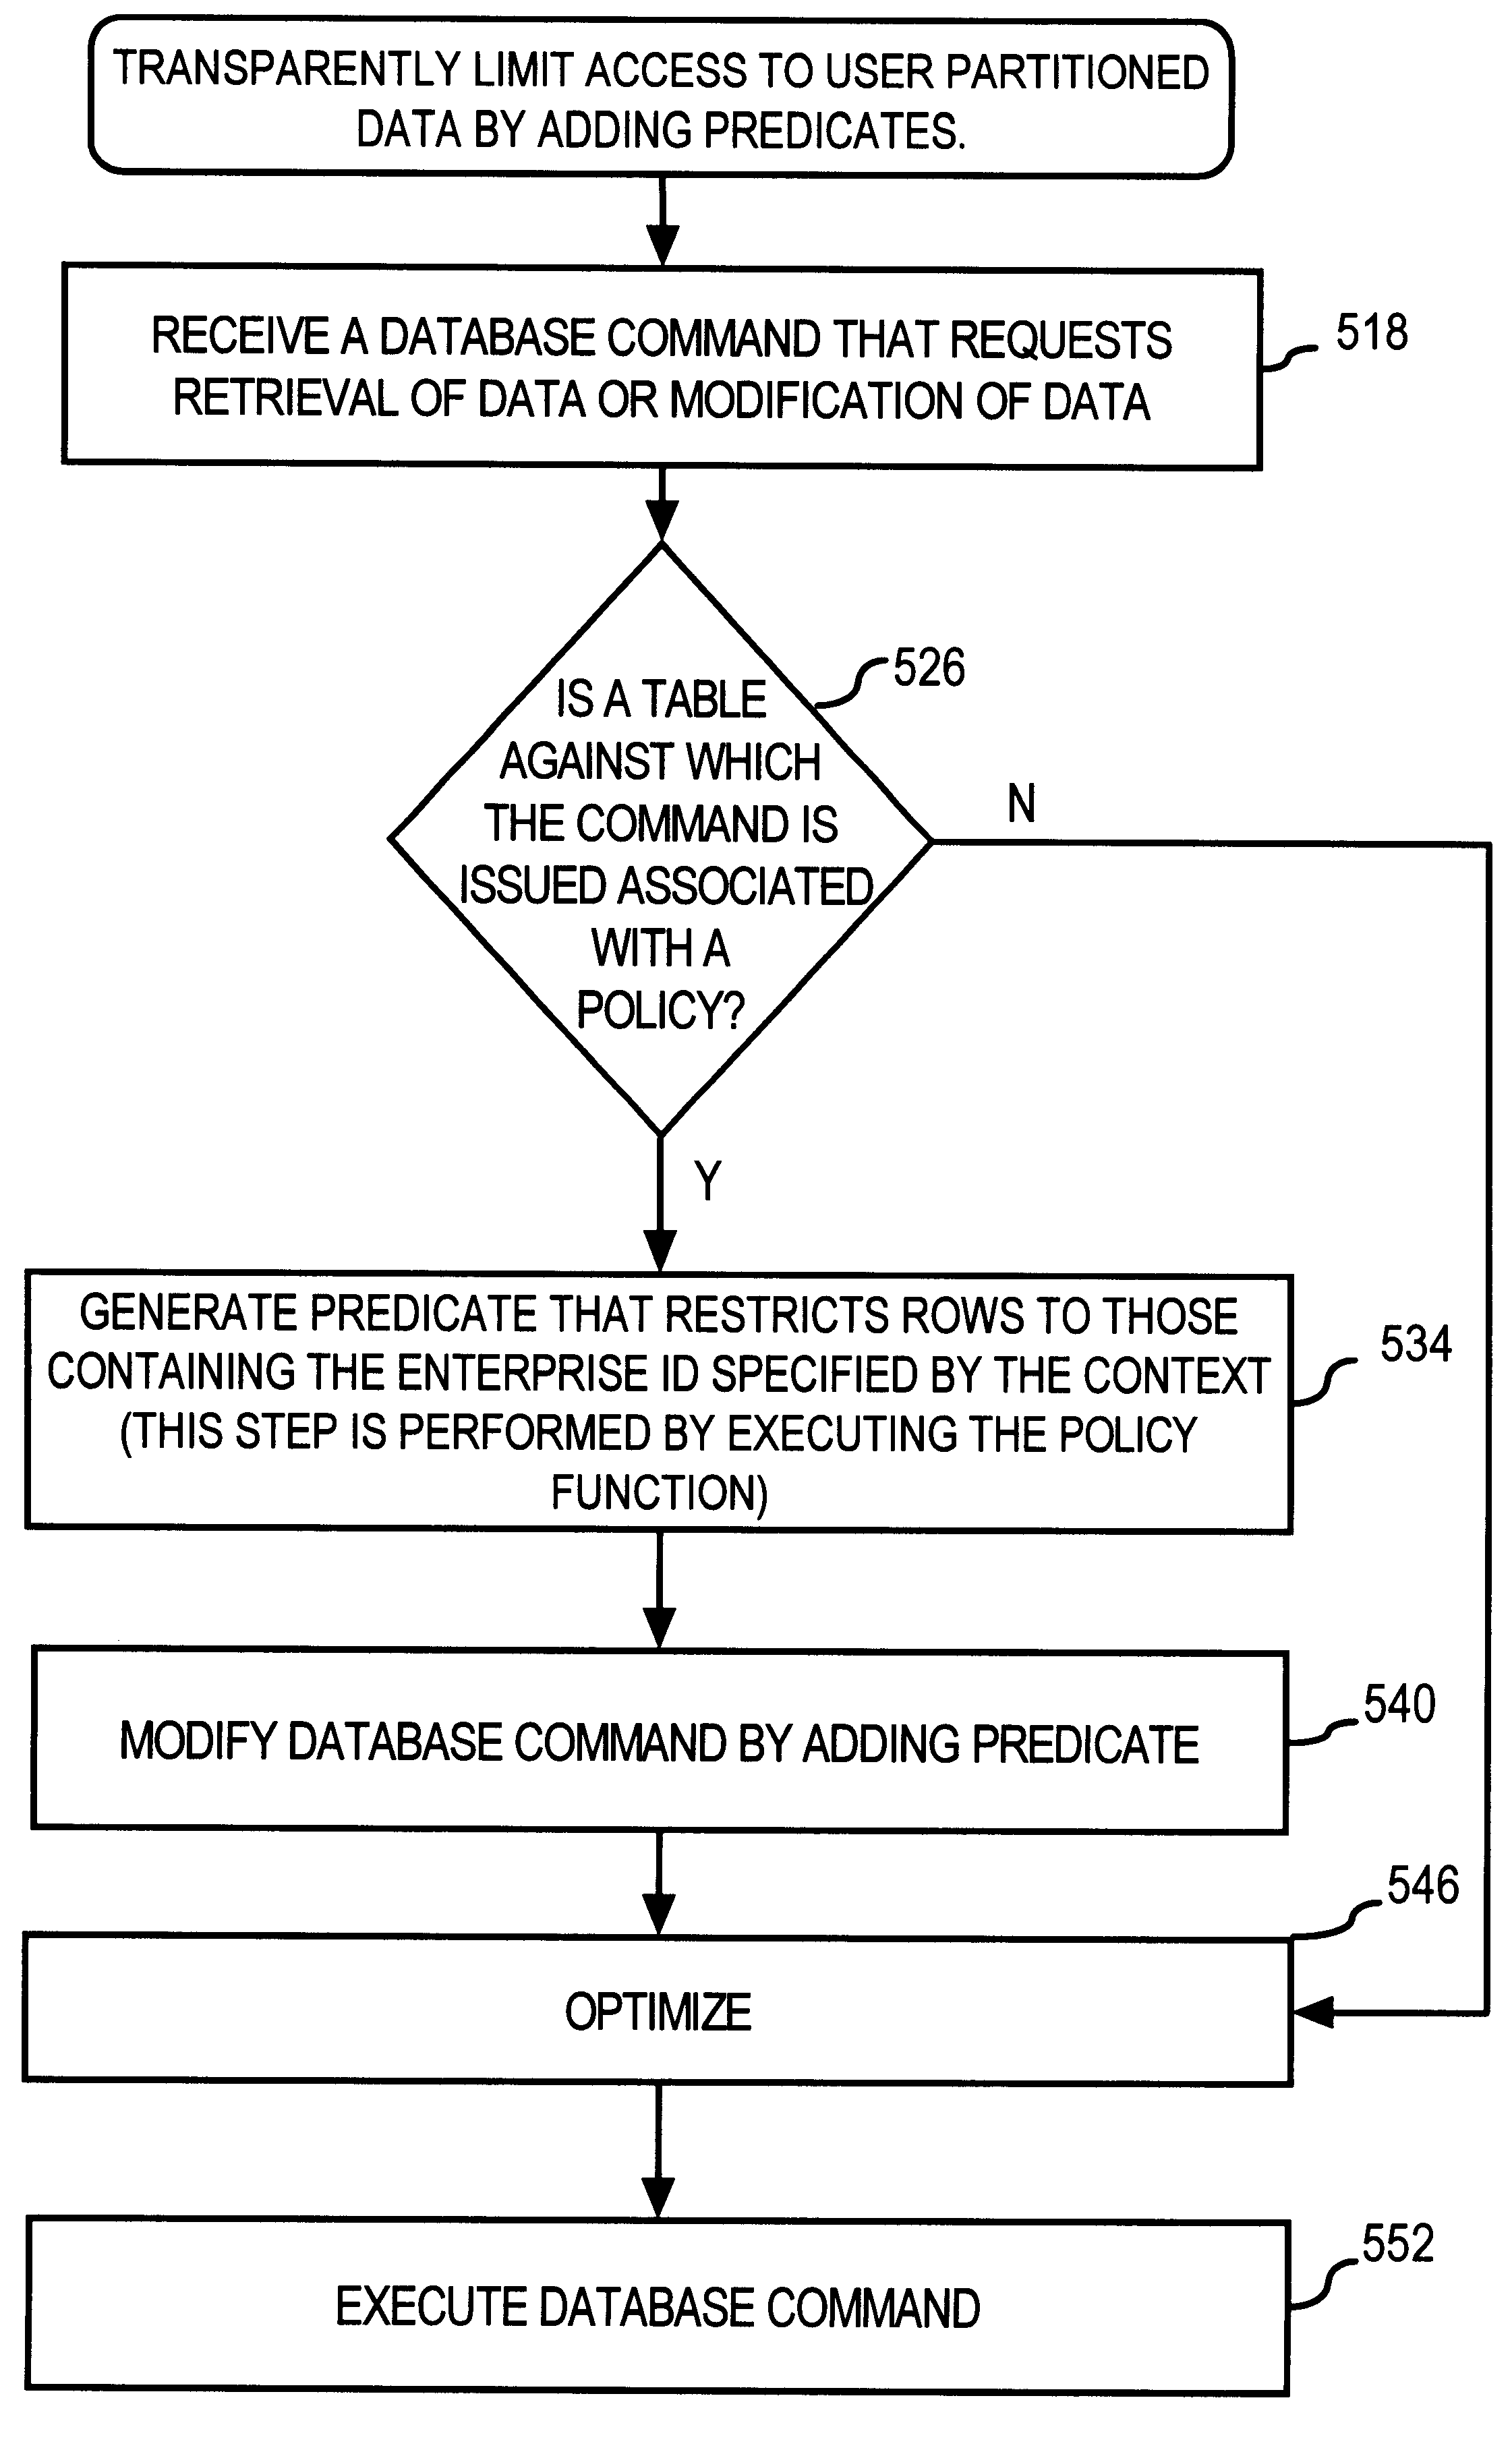 Virtually partitioning user data in a database system